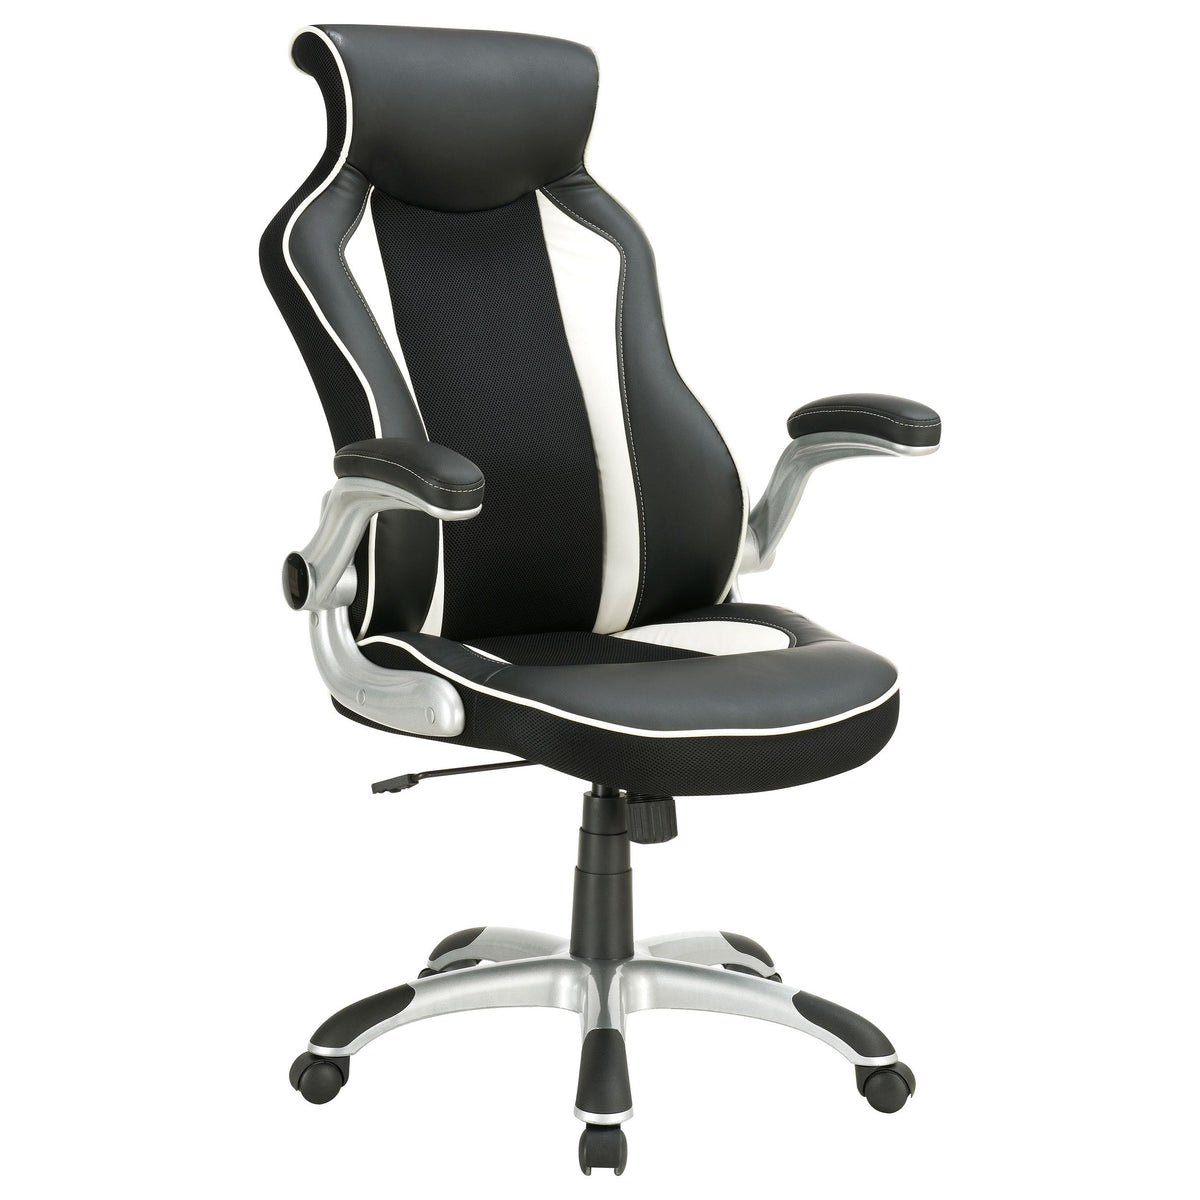 Dustin Adjustable Height Office Chair Black and Silver Dustin Adjustable Height Office Chair Black and Silver Half Price Furniture